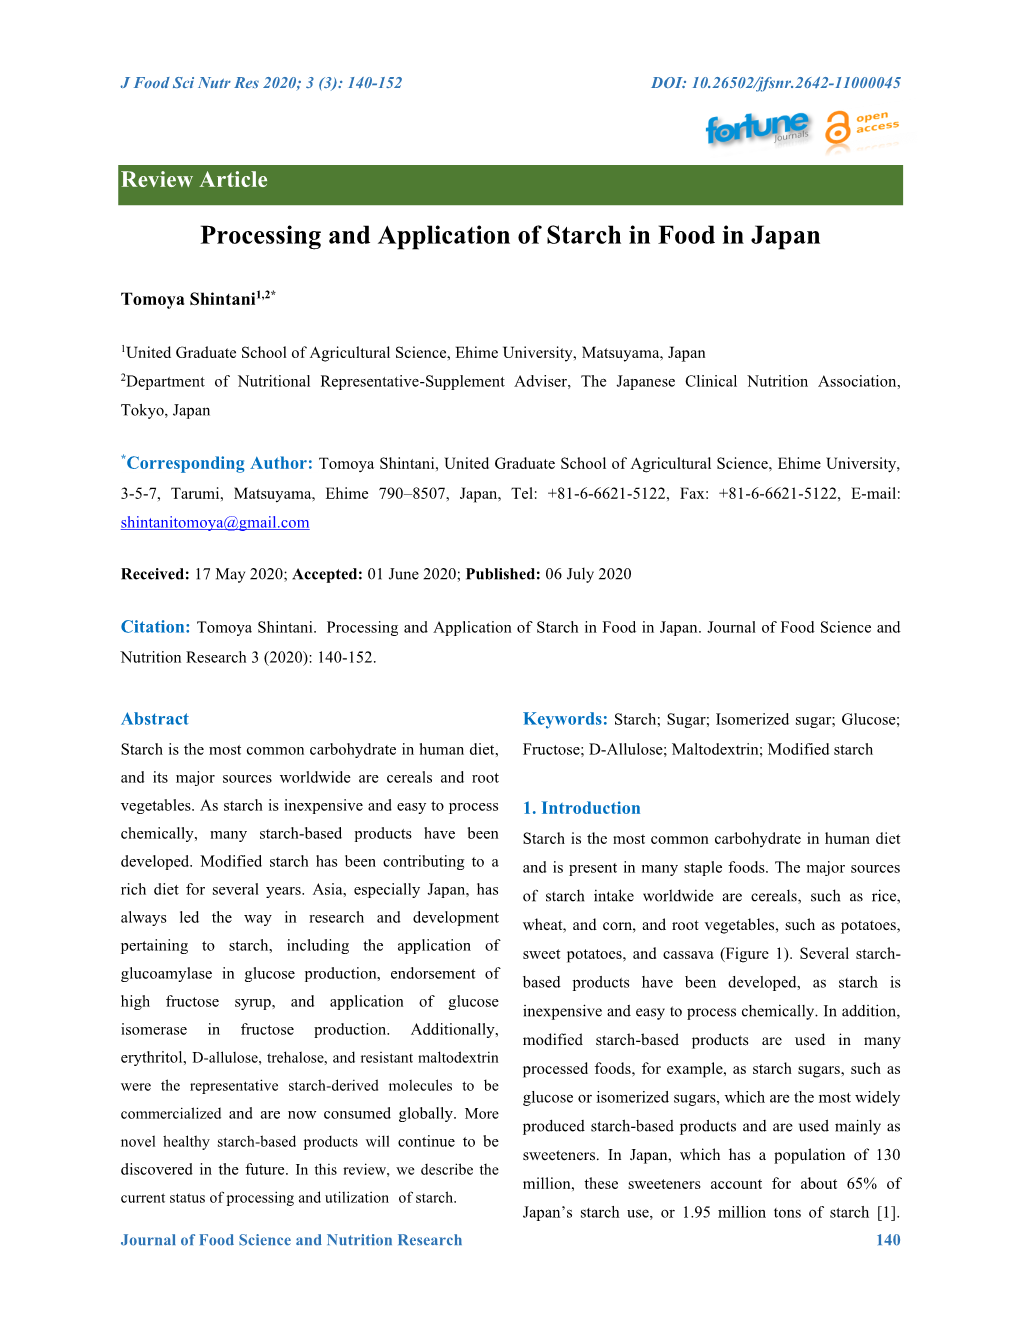 Processing and Application of Starch in Food in Japan